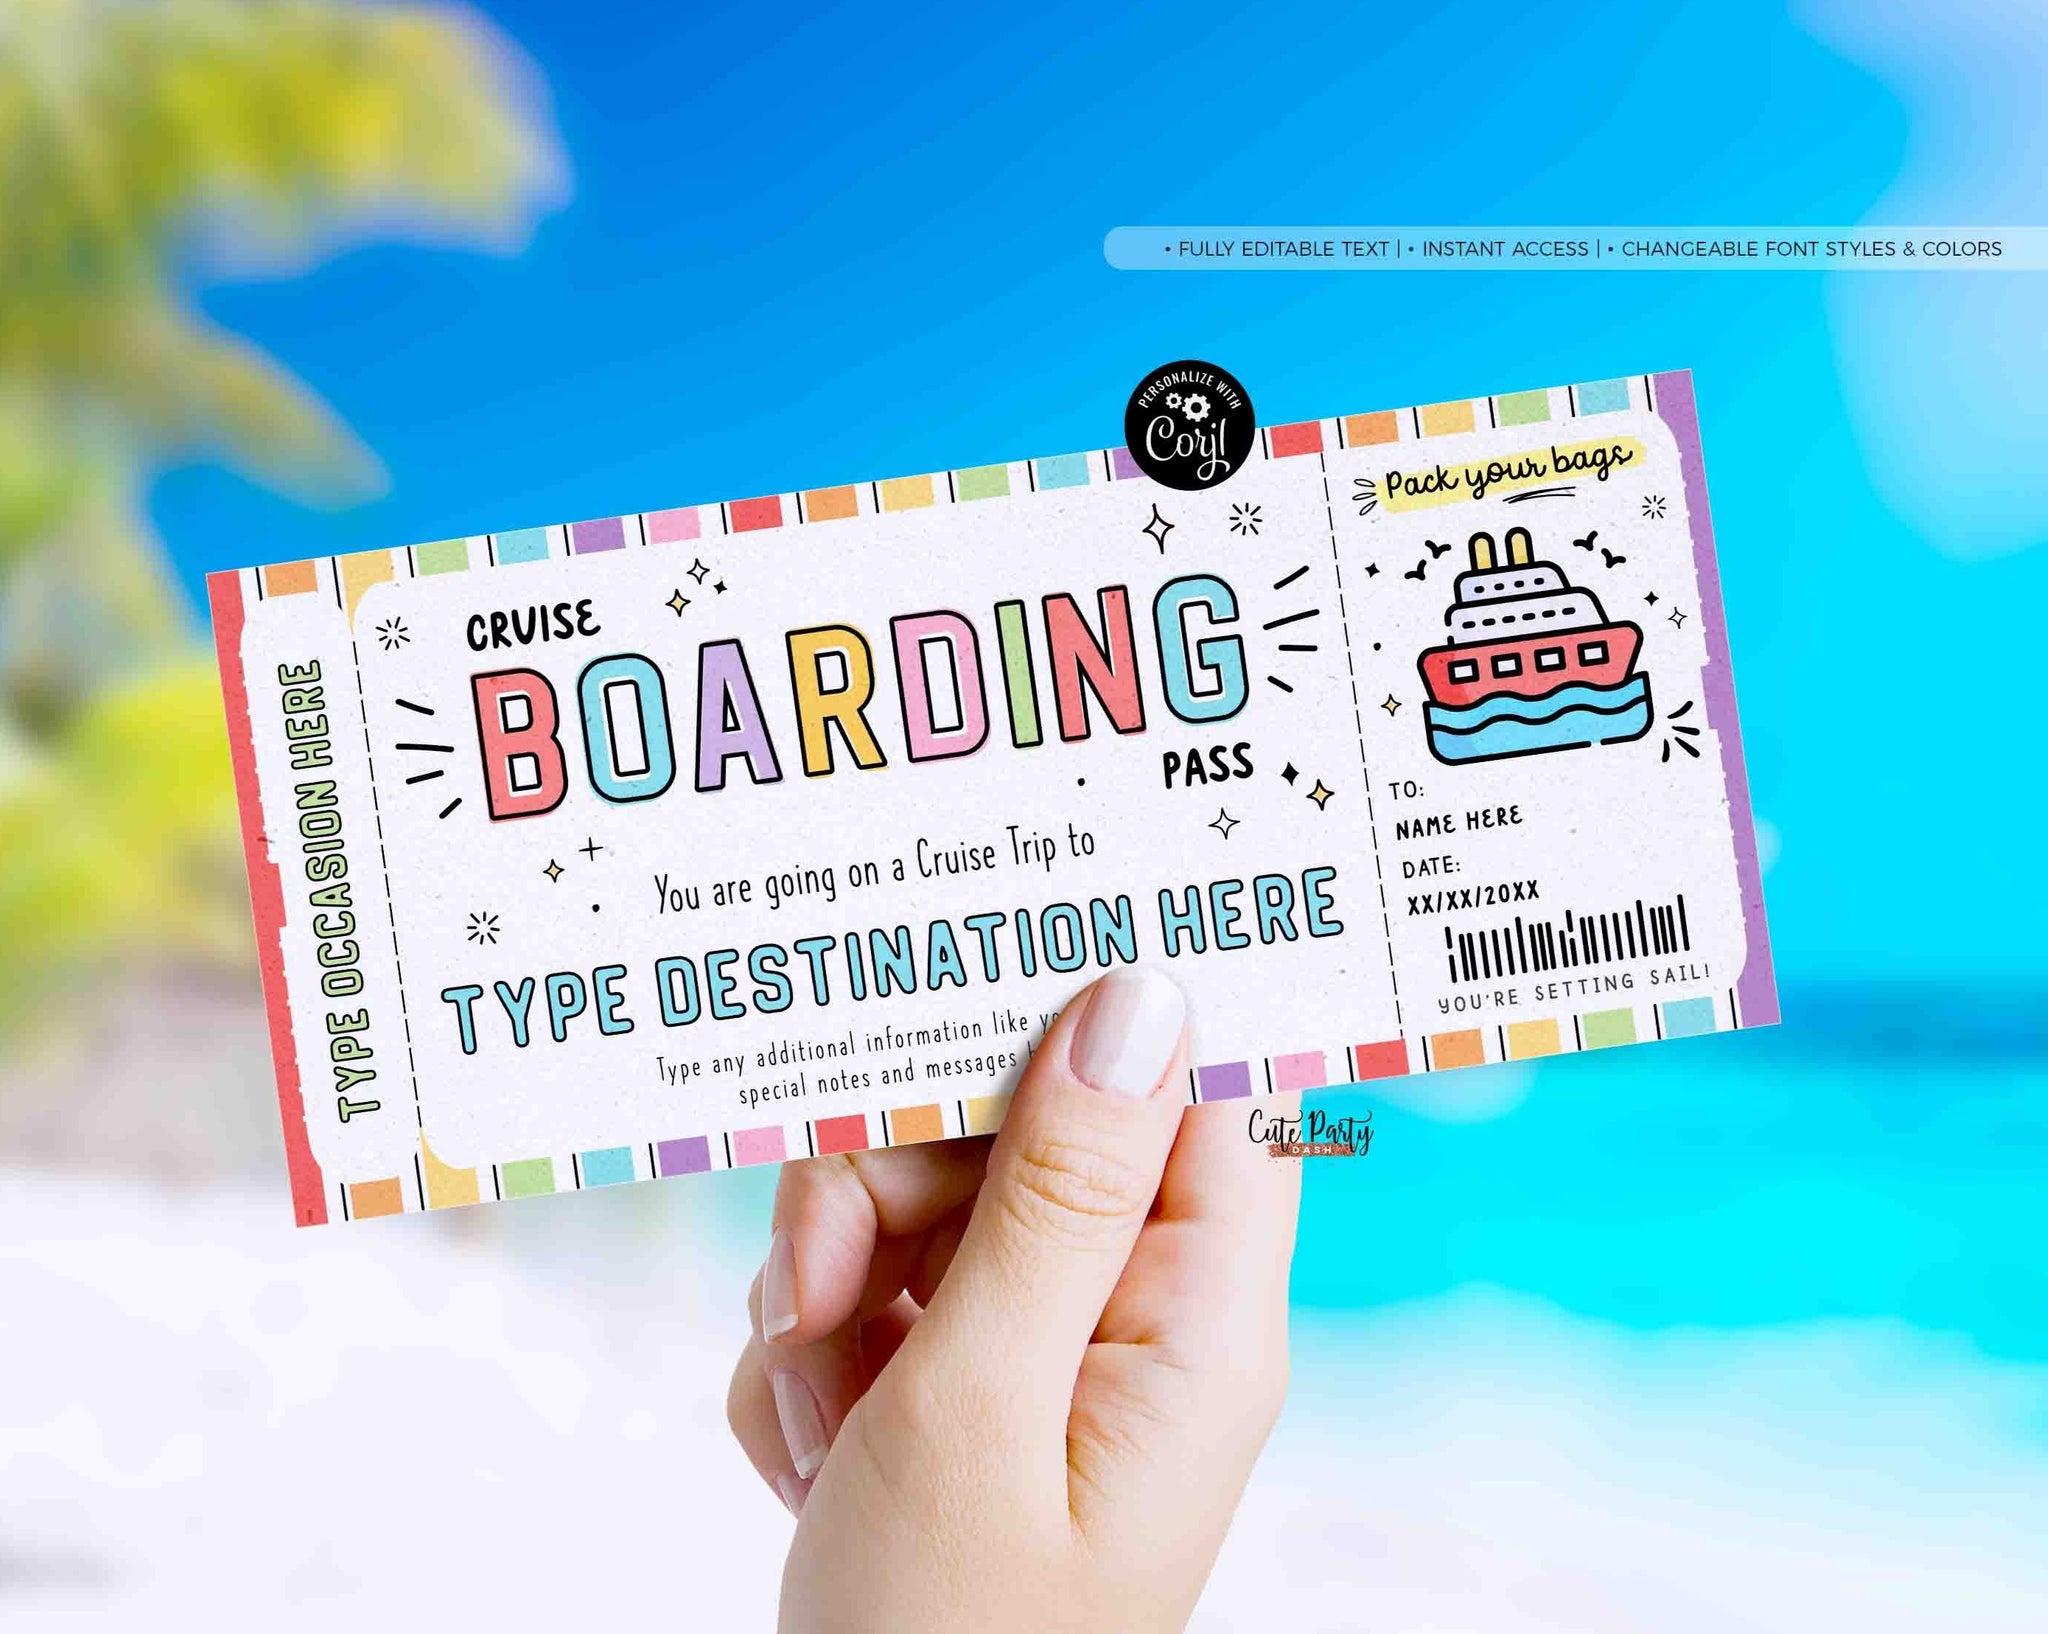 Cruise Boarding Pass Vacation Ticket Gift Voucher, Editable Gift Ticket Template, Surprise Cruise Trip gift ticket, INSTANT DOWNLOAD